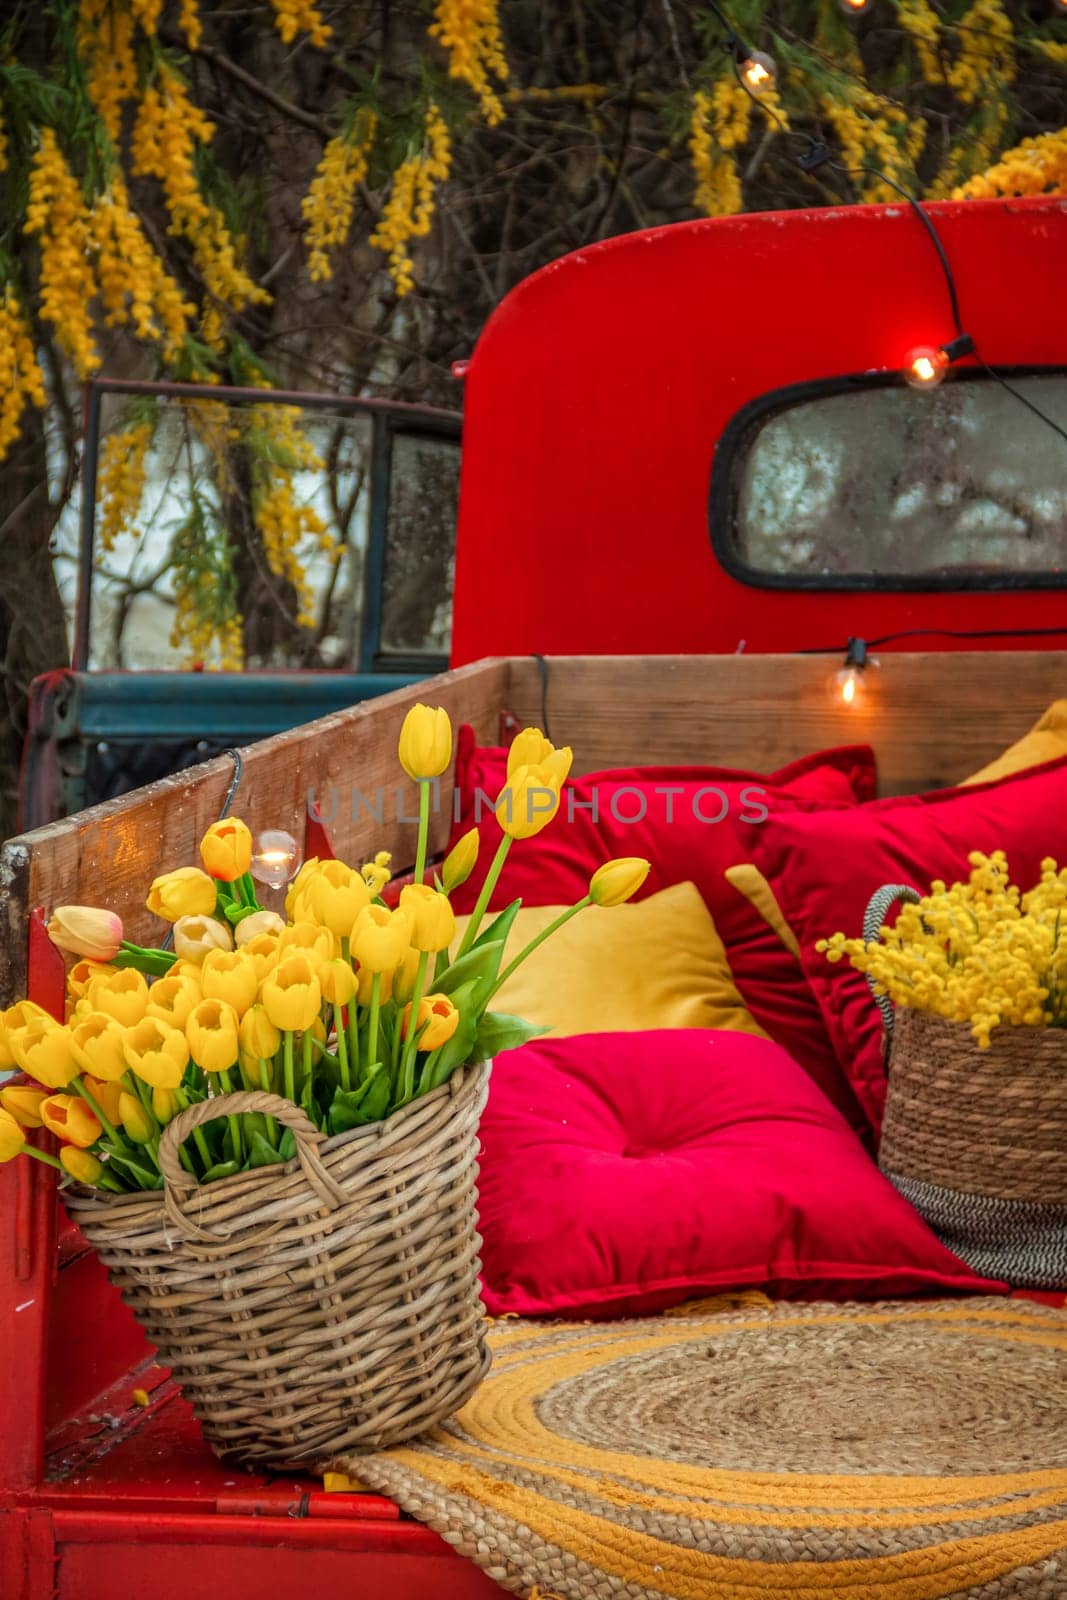 Wicker basket with beautiful flowers. Tulips, mimosas. A bright red truck brought a lot of flowers. by Alina_Lebed